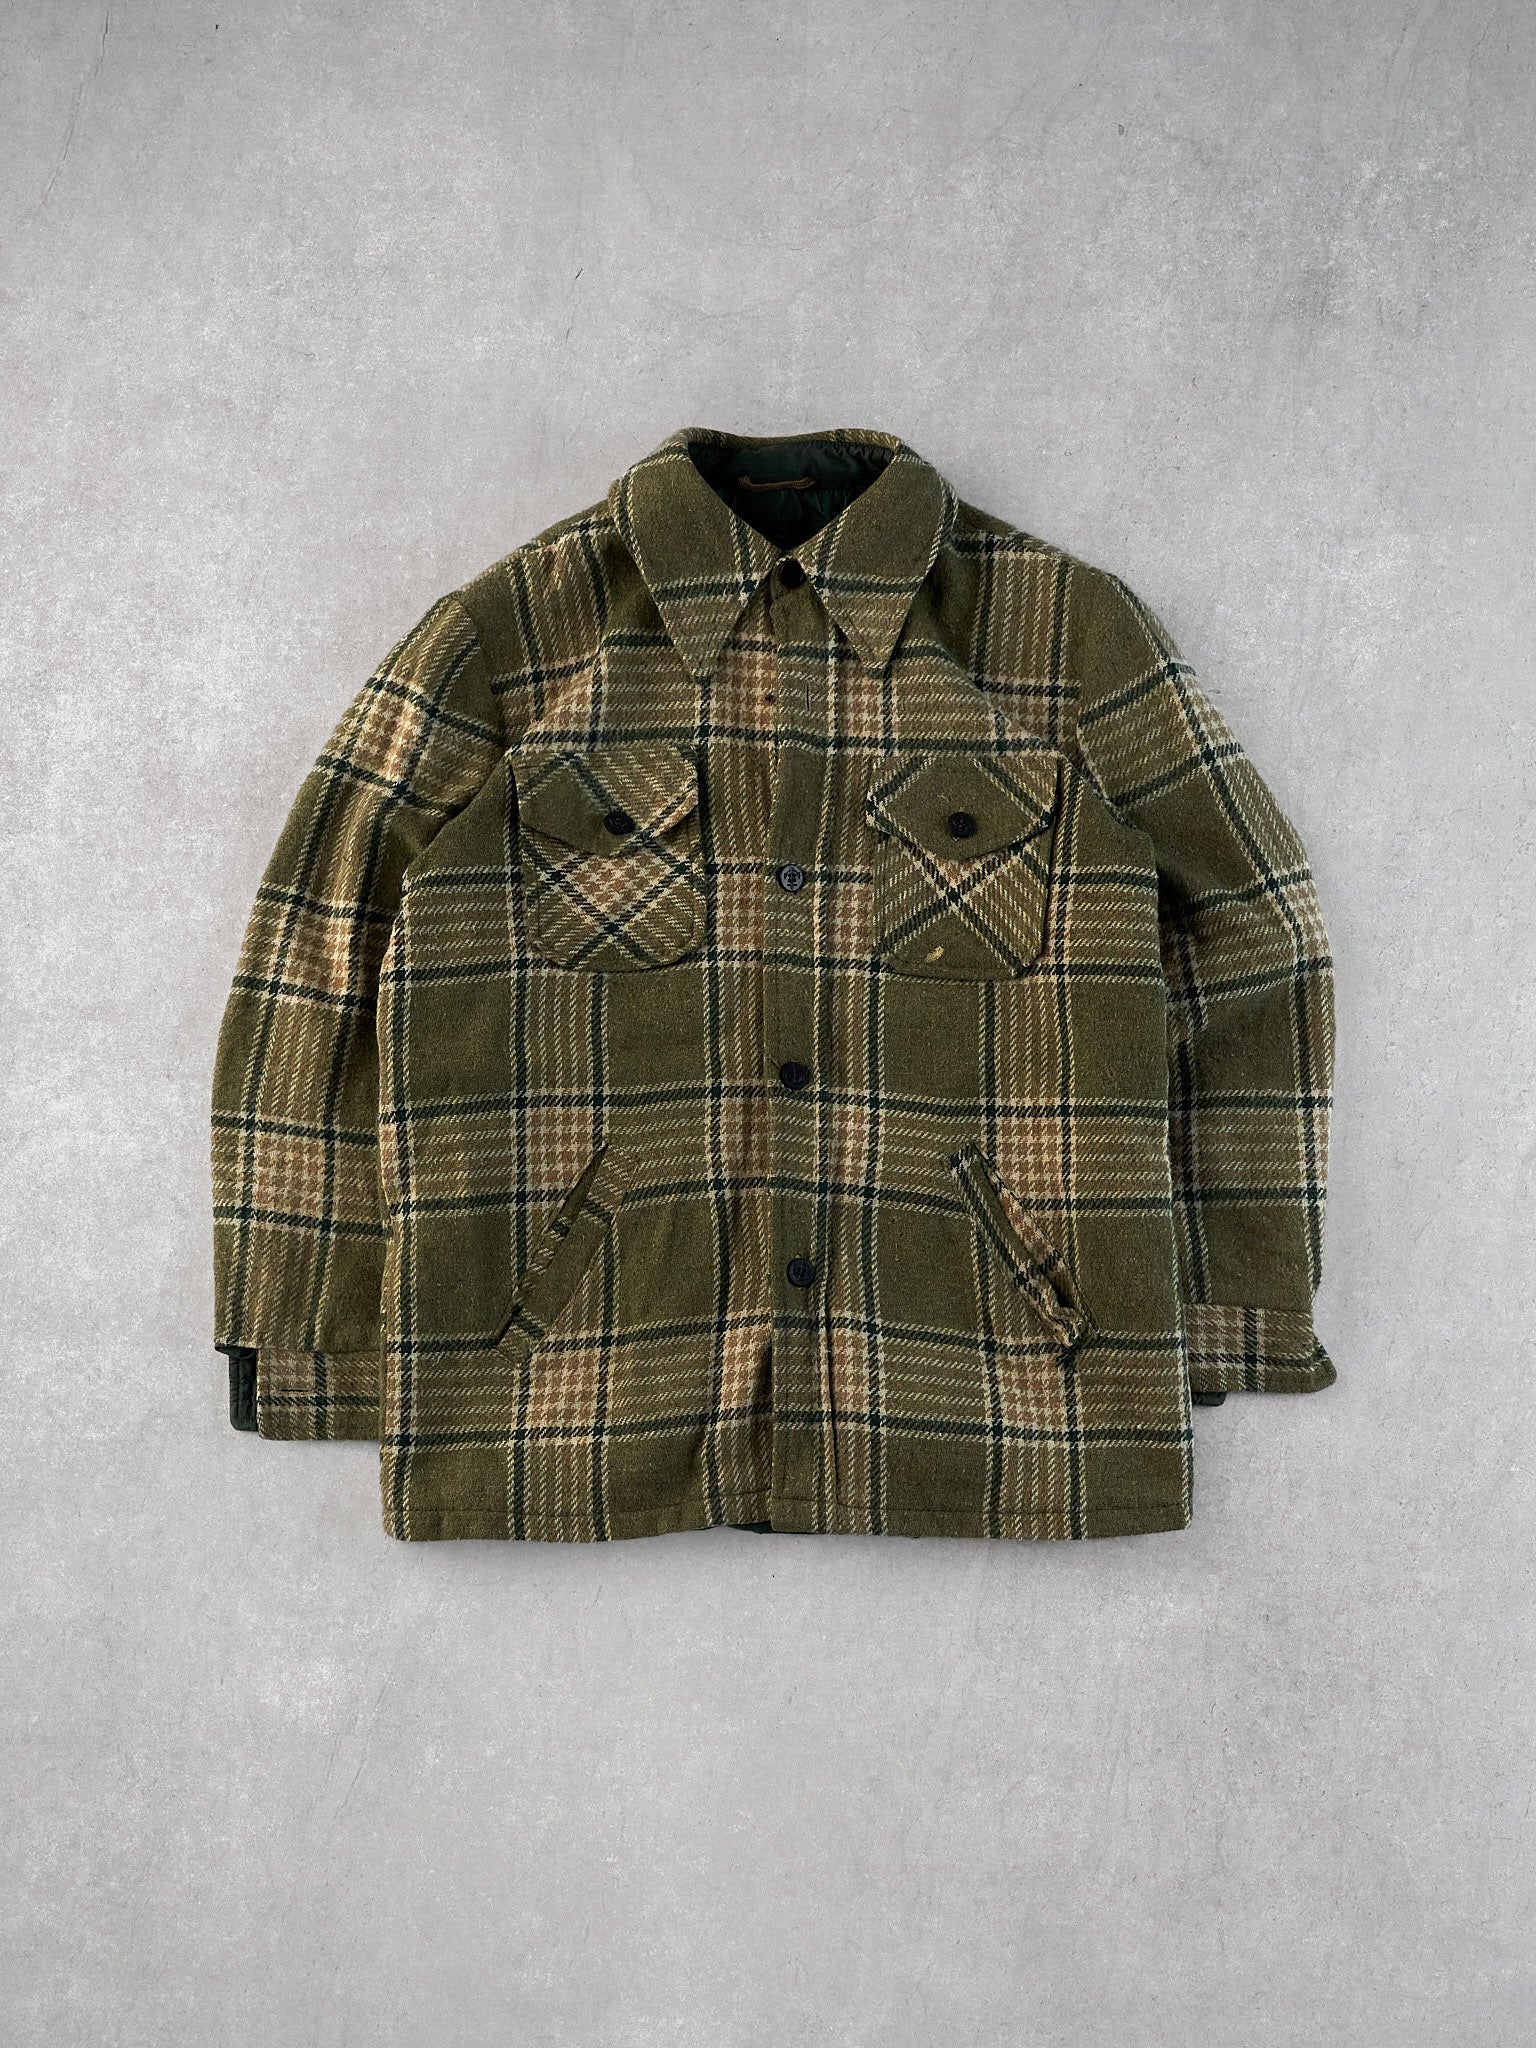 Vintage 90s Moss Green and Brown Sears Sports Plaid Collared Button Up (M)